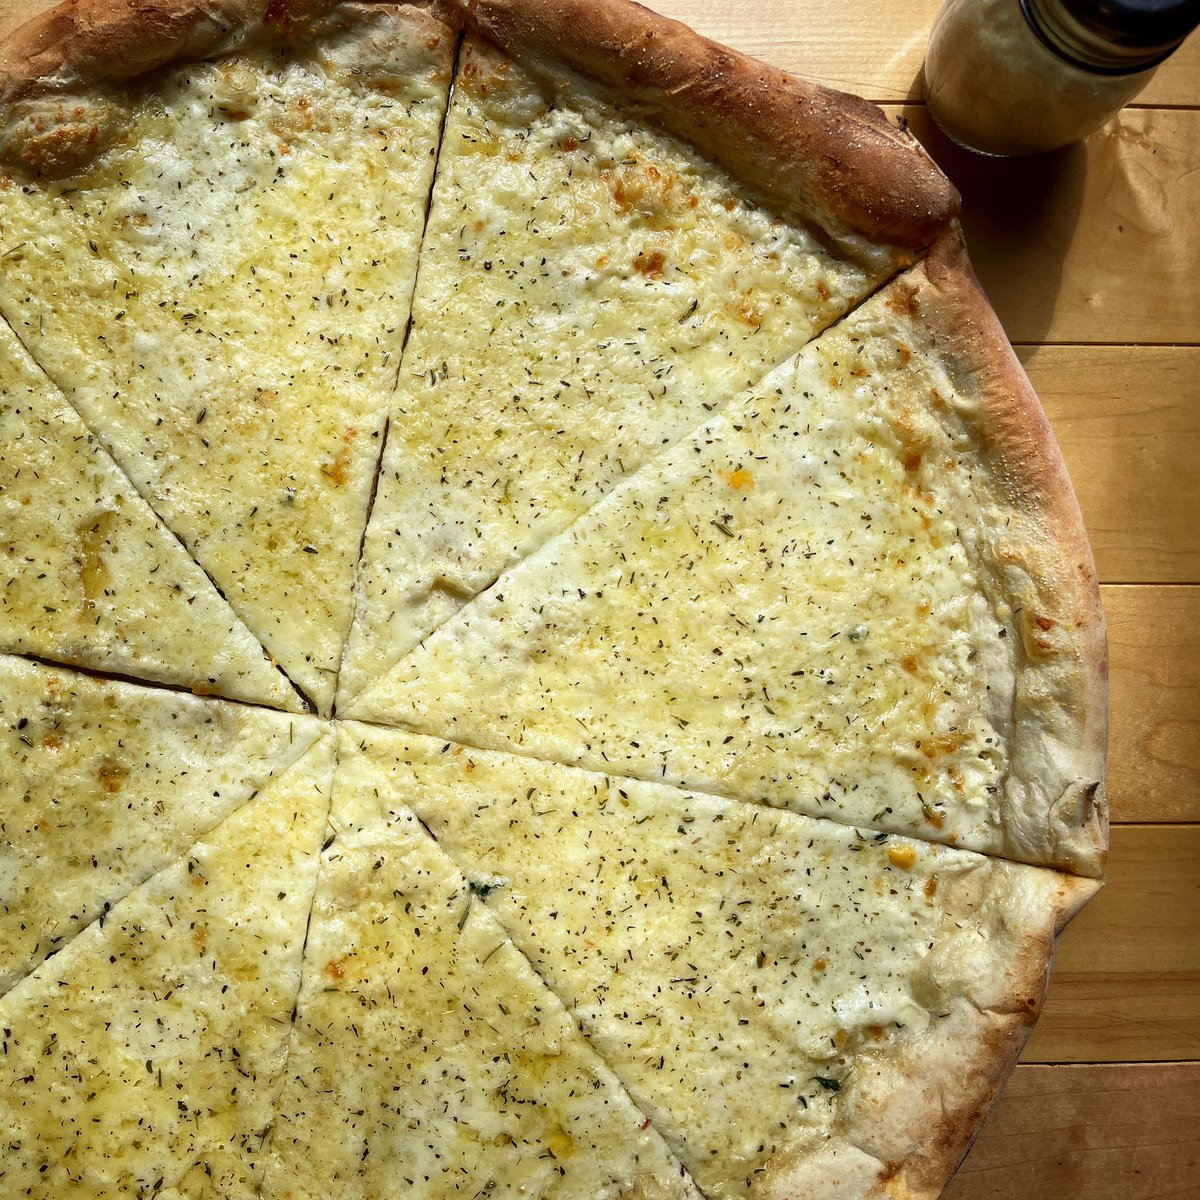 Mozzarella! Gruyère! Parmesan! Asiago! Meet your cheesy, herby-crema weekly special, 𝟰 𝗖𝗵𝗲𝗲𝘀𝗲! Now available and waiting for hungry pizza lovers everywhere! #IansPizza